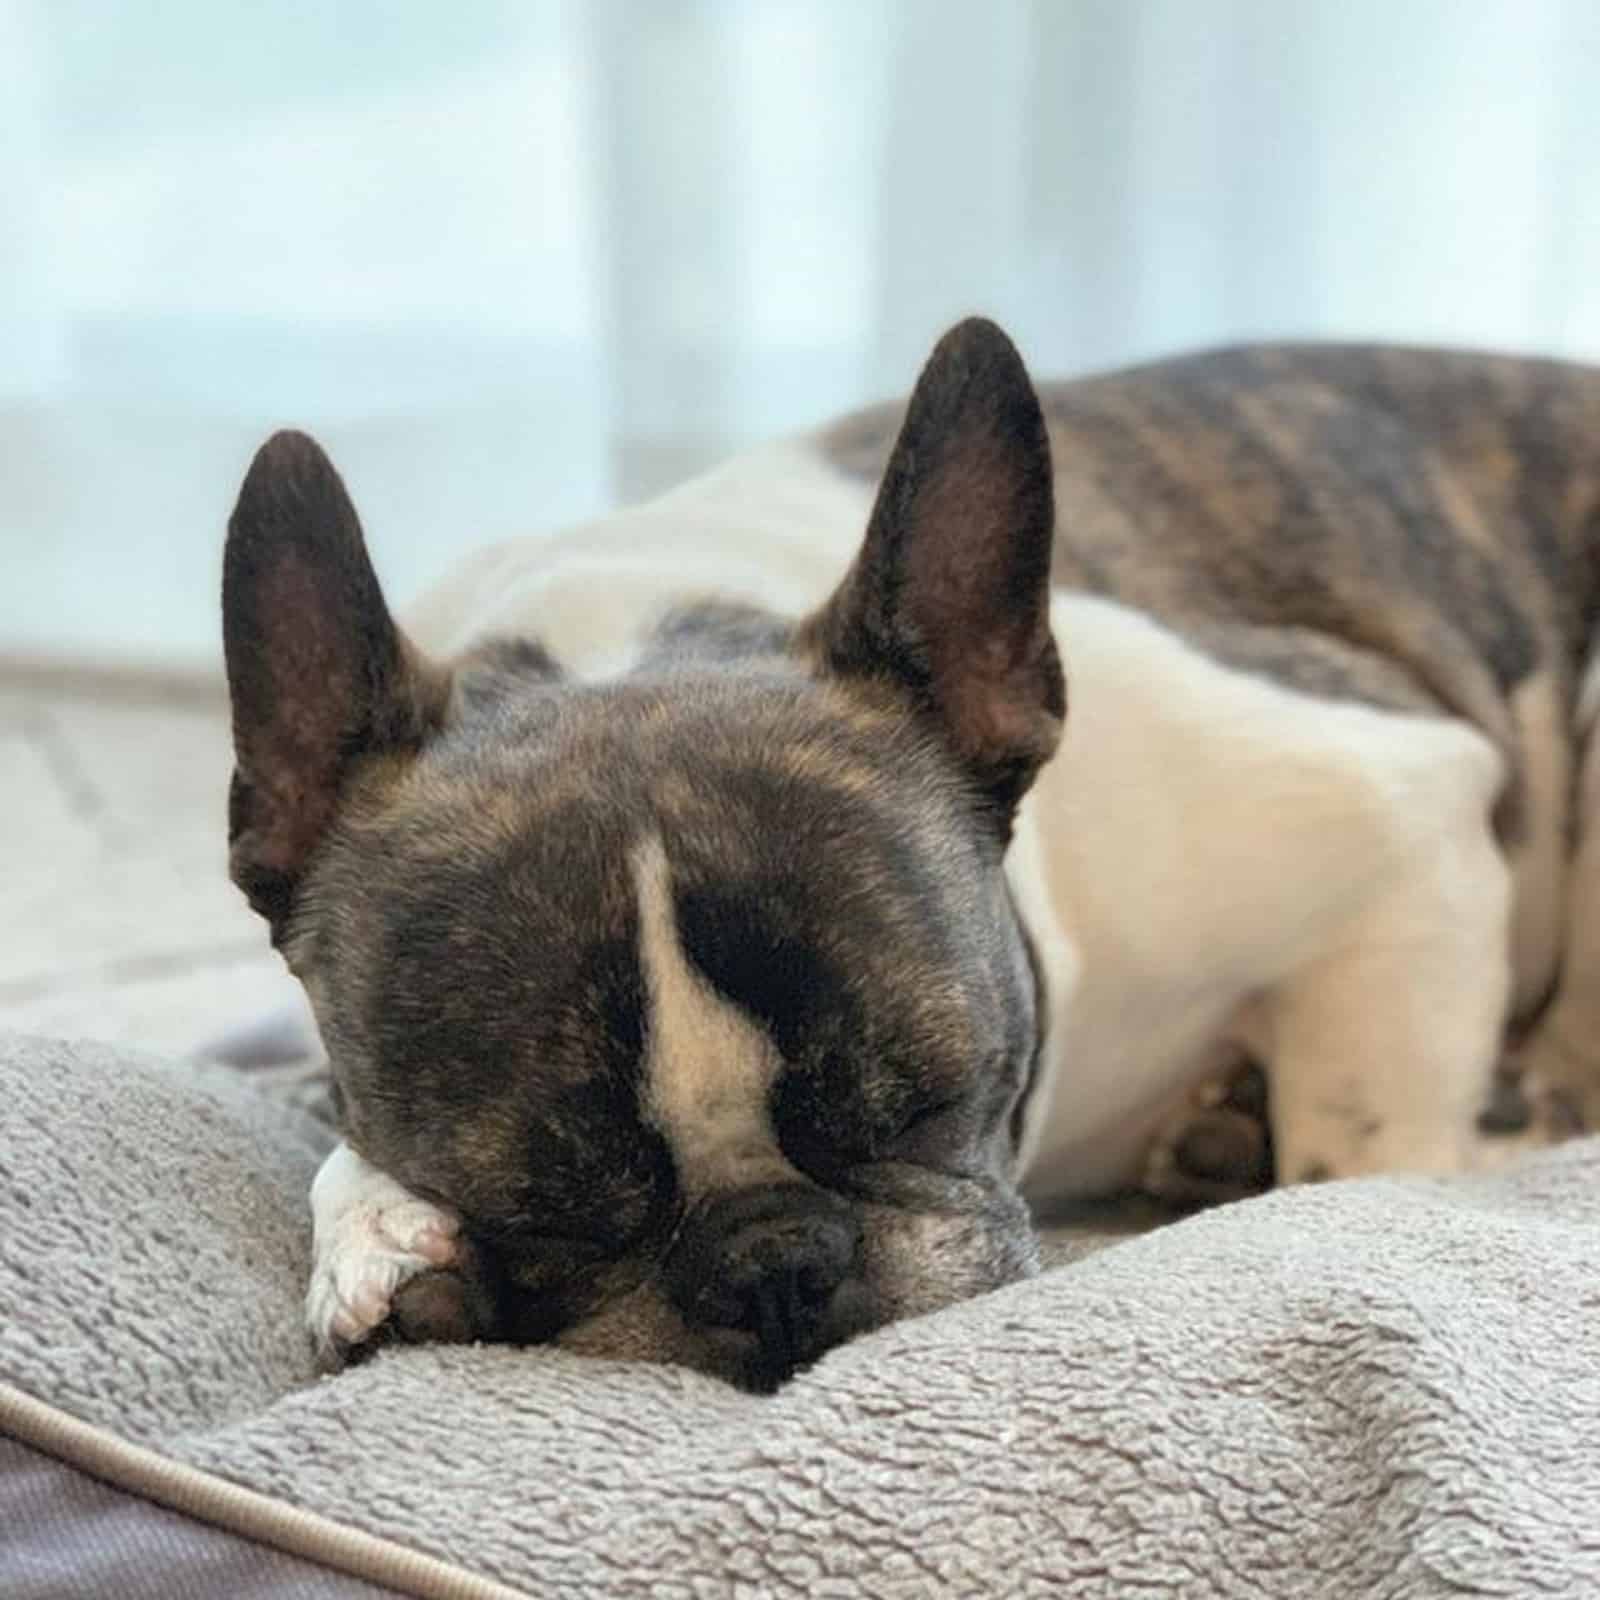 brindle pied french bulldog sleeping in bed